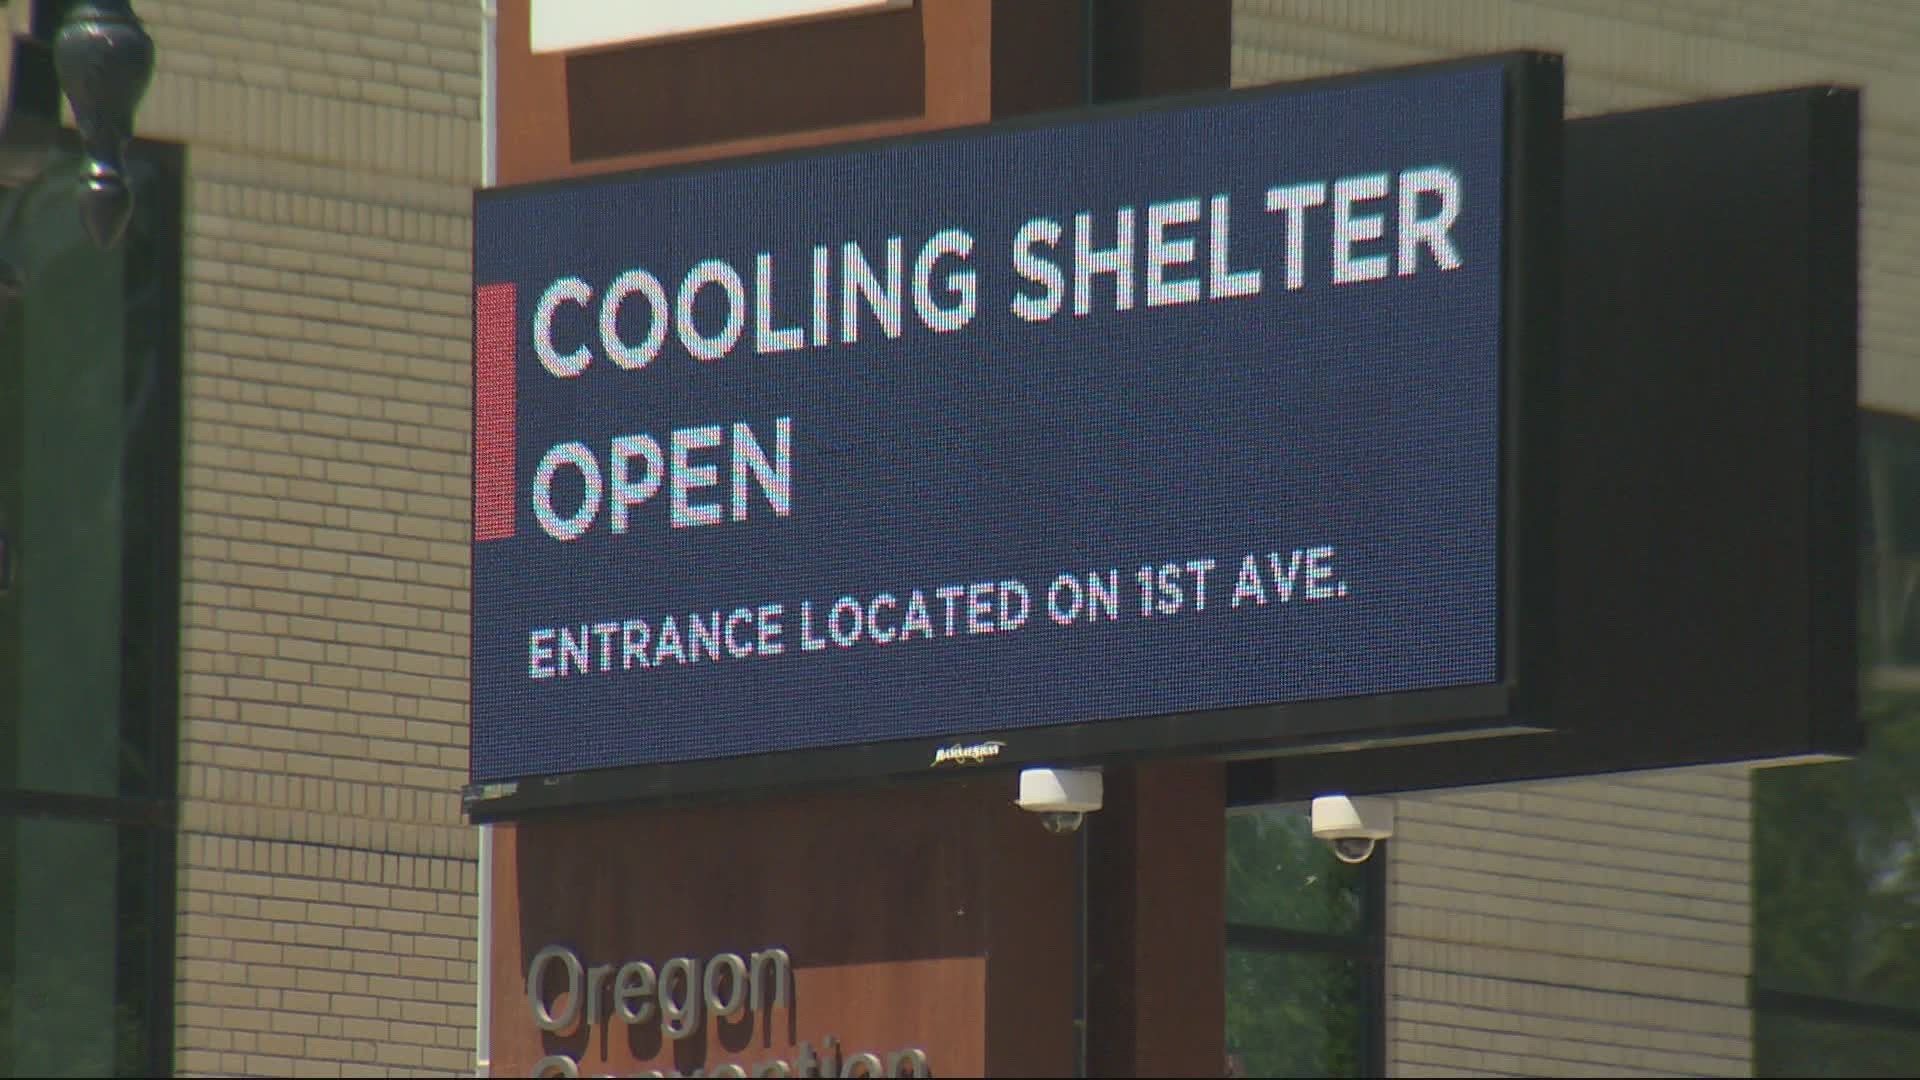 Cooling centers are open to help people escape dangerous heat this weekend. Christelle Koumoué explains how the facilities provide more than a little relief.